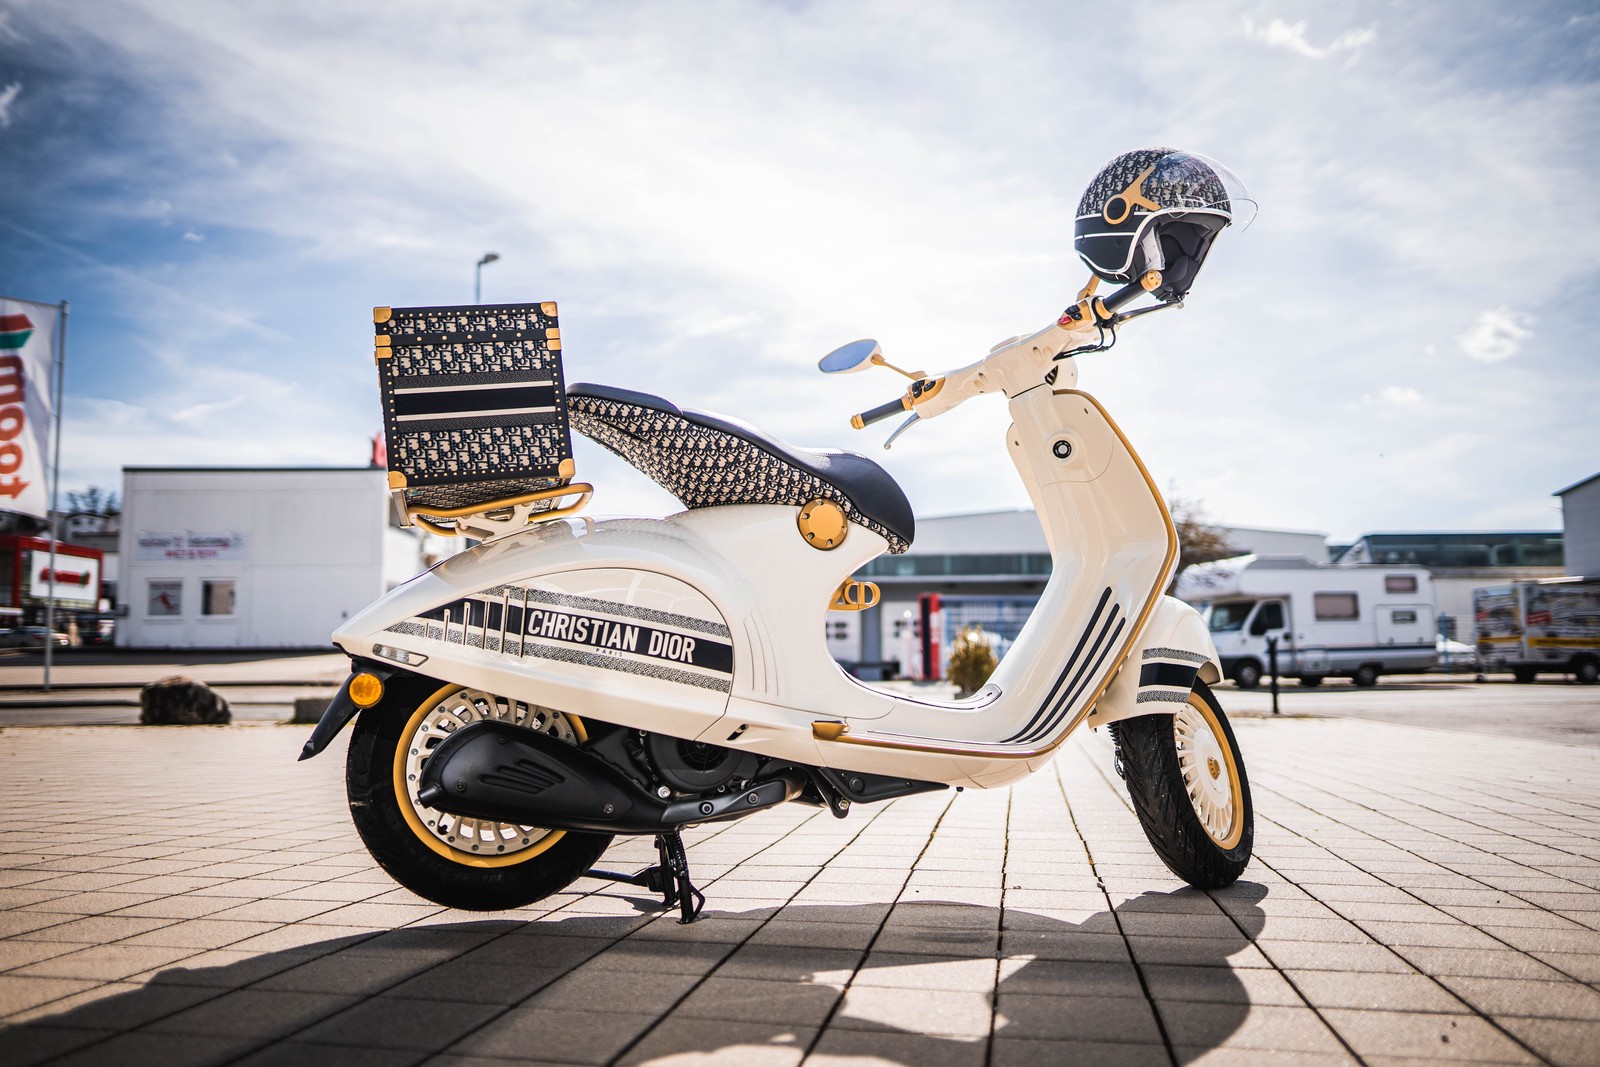 Ride in Style with the Christian Dior Vespa 946